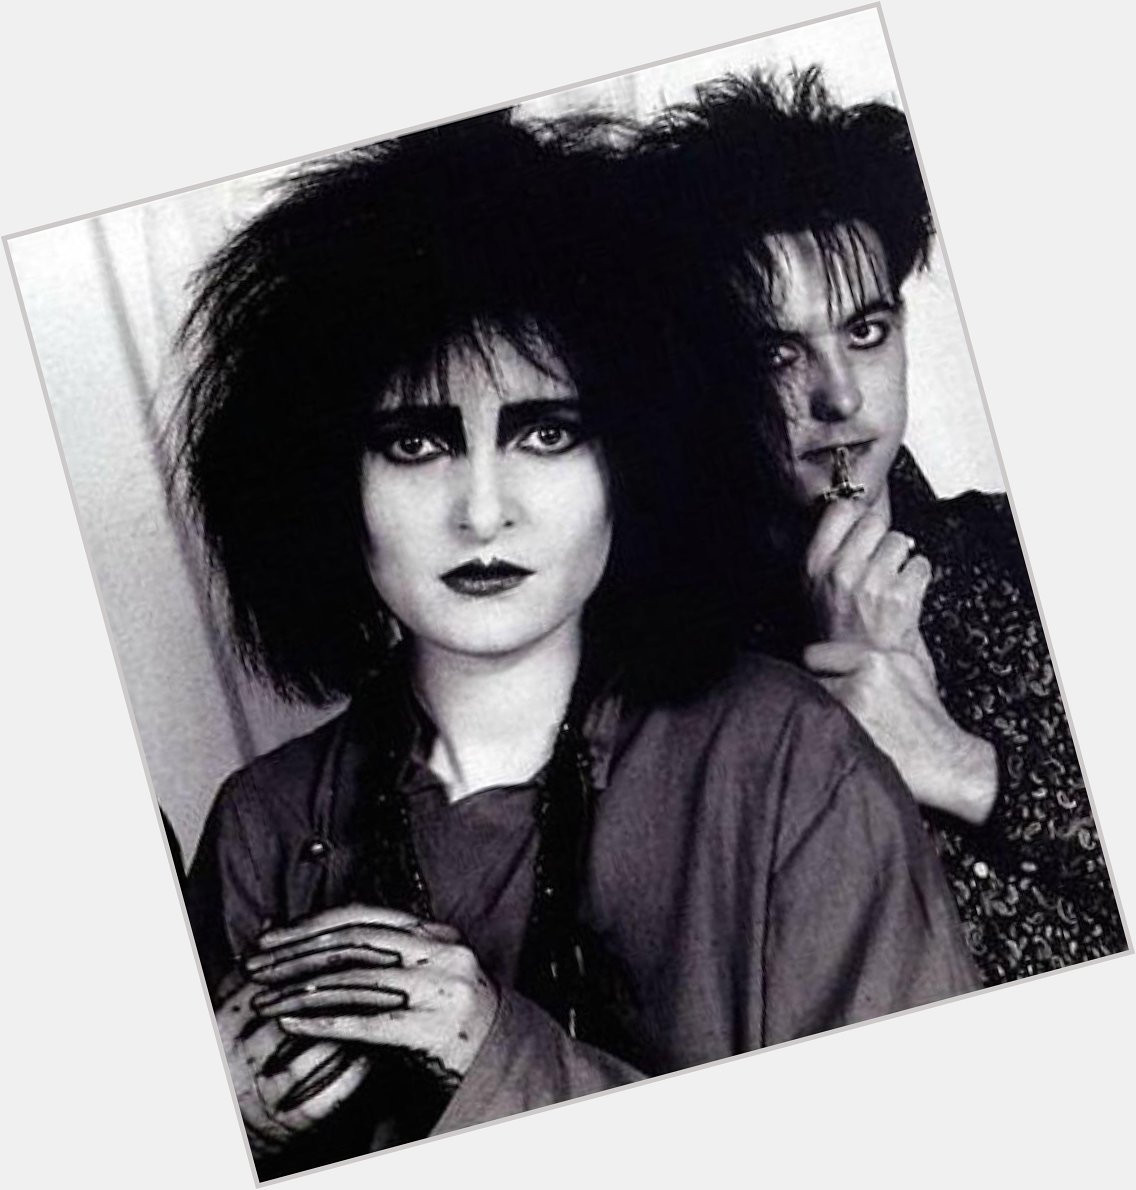 When you see \"Siouxsie Sioux\" trending. Nooooo!!!! Oh, cool! Happy birthday! 